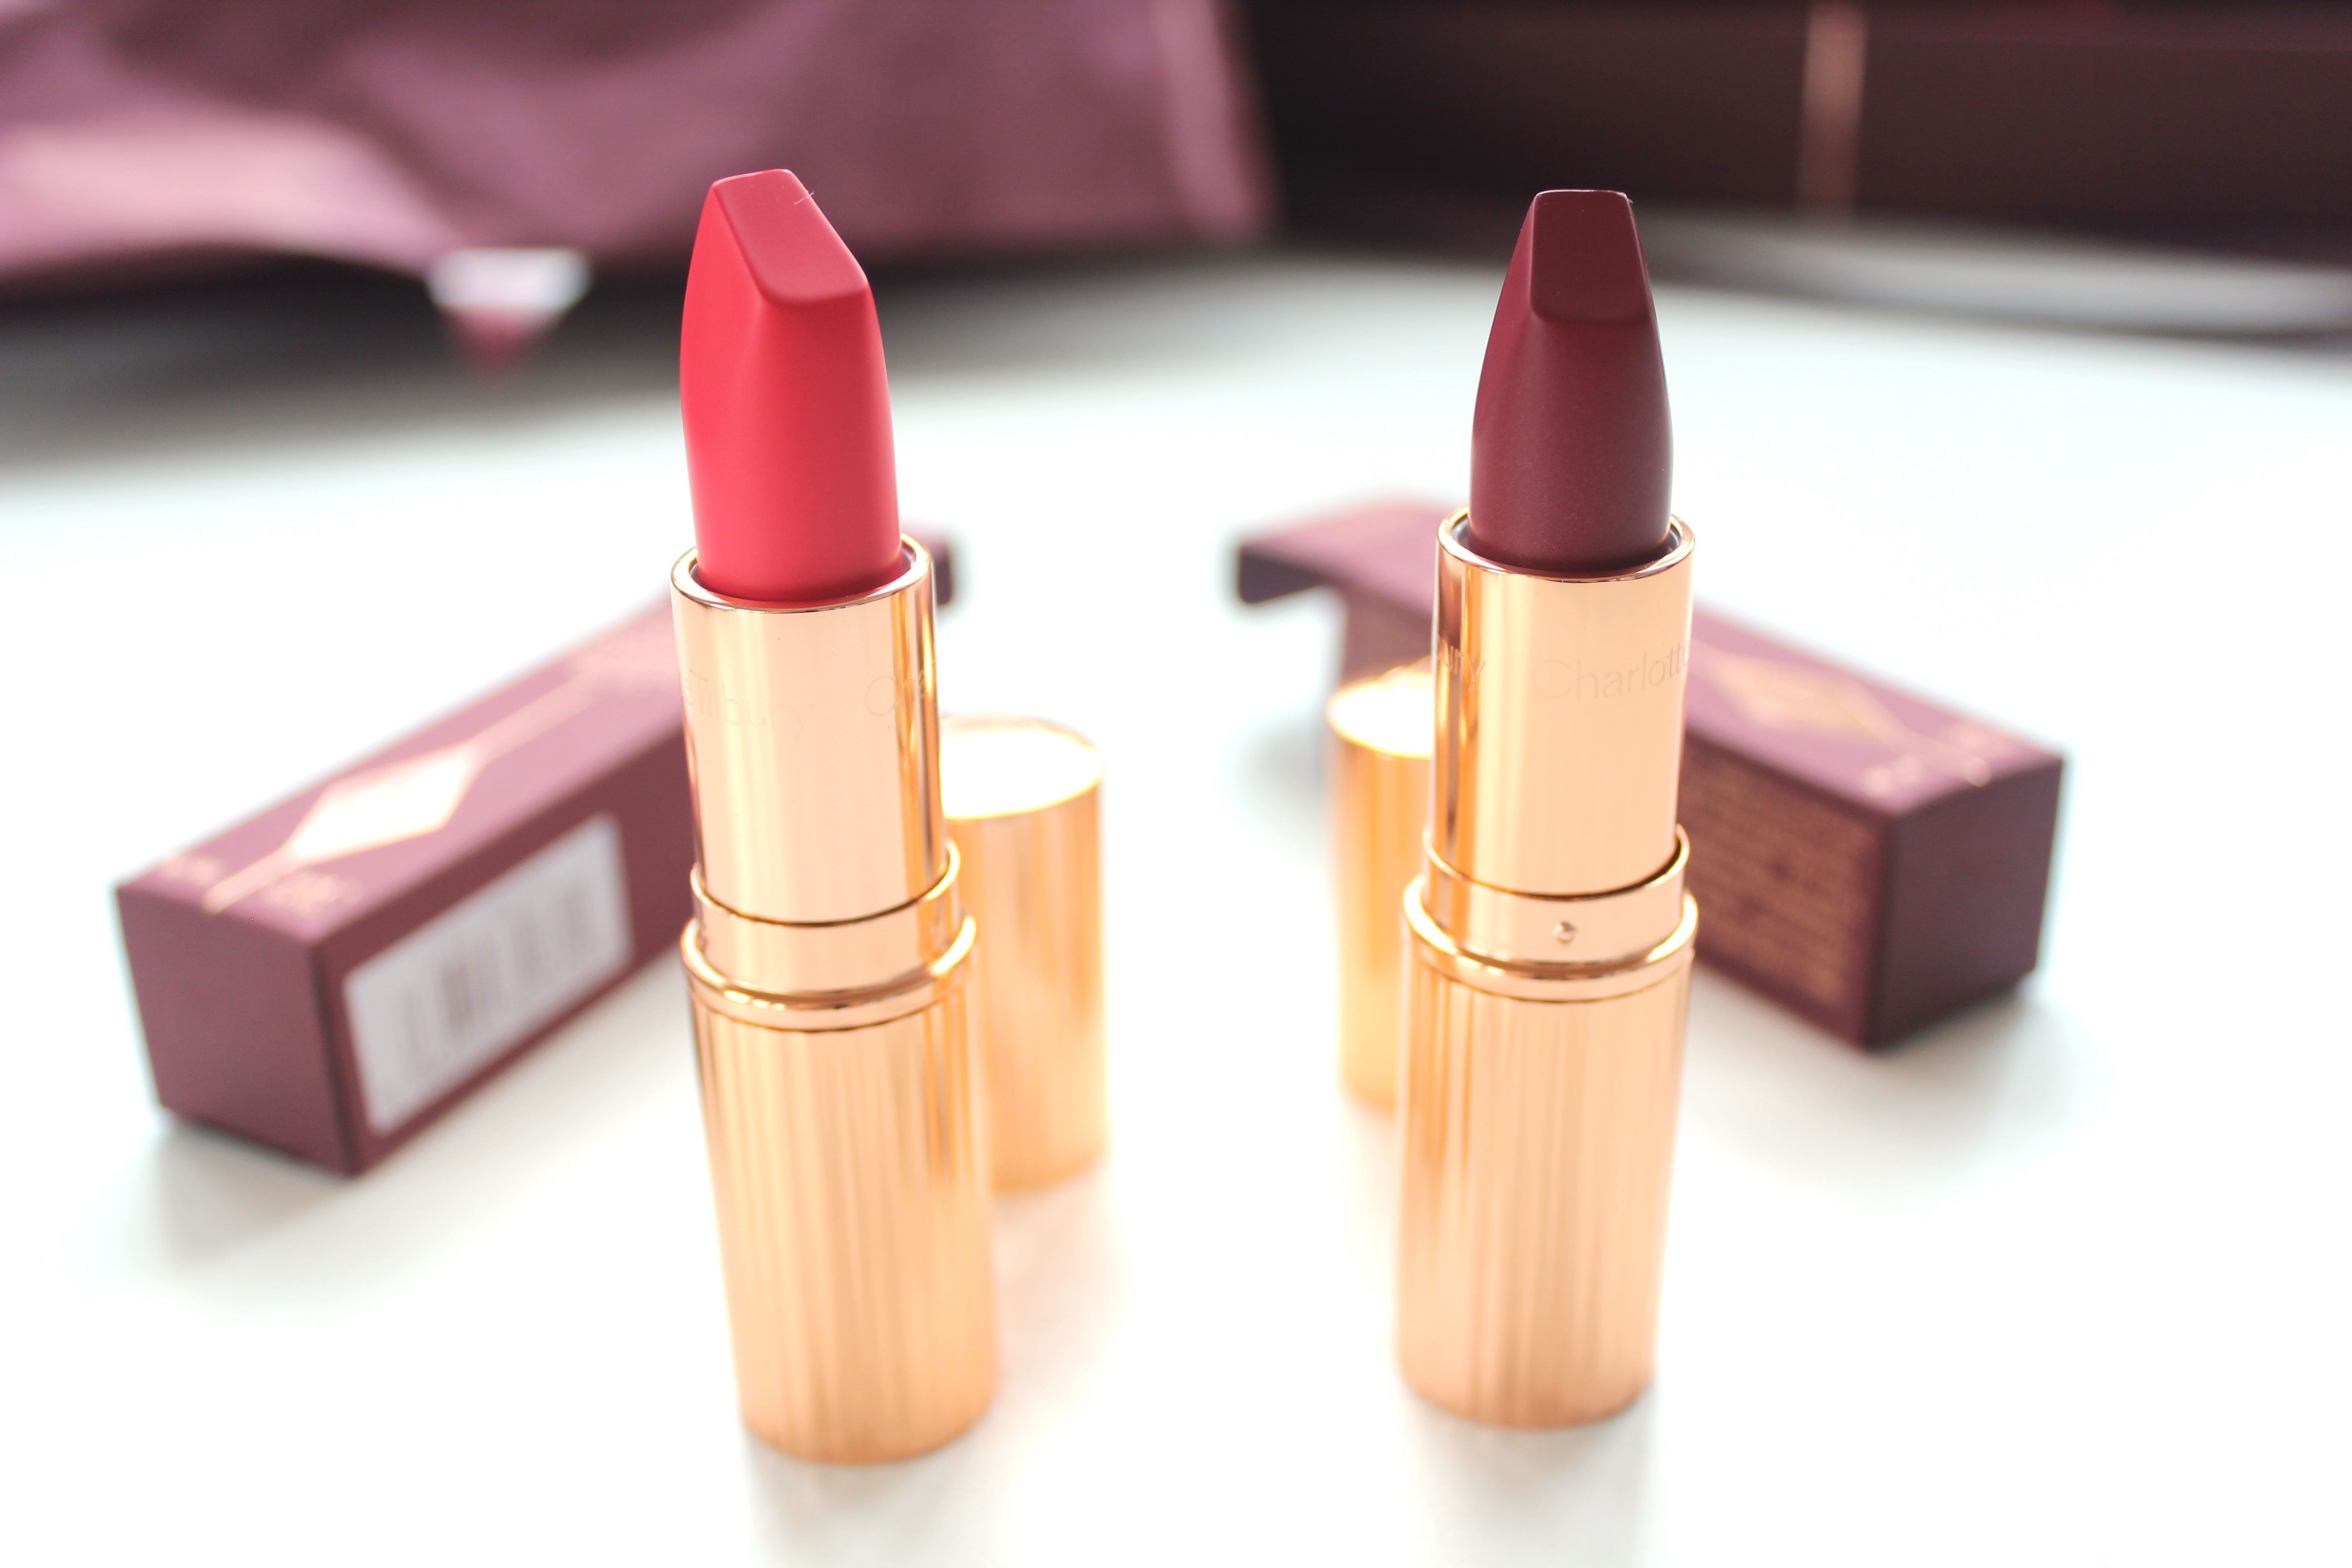 Charlotte-Tilbury-Haul-and-product-review-all-in-one-matte-reveloution-lipstick-in-love-liberty-(right)-and-Lost-cherry-(left)-by-face-made-up-facemadeup